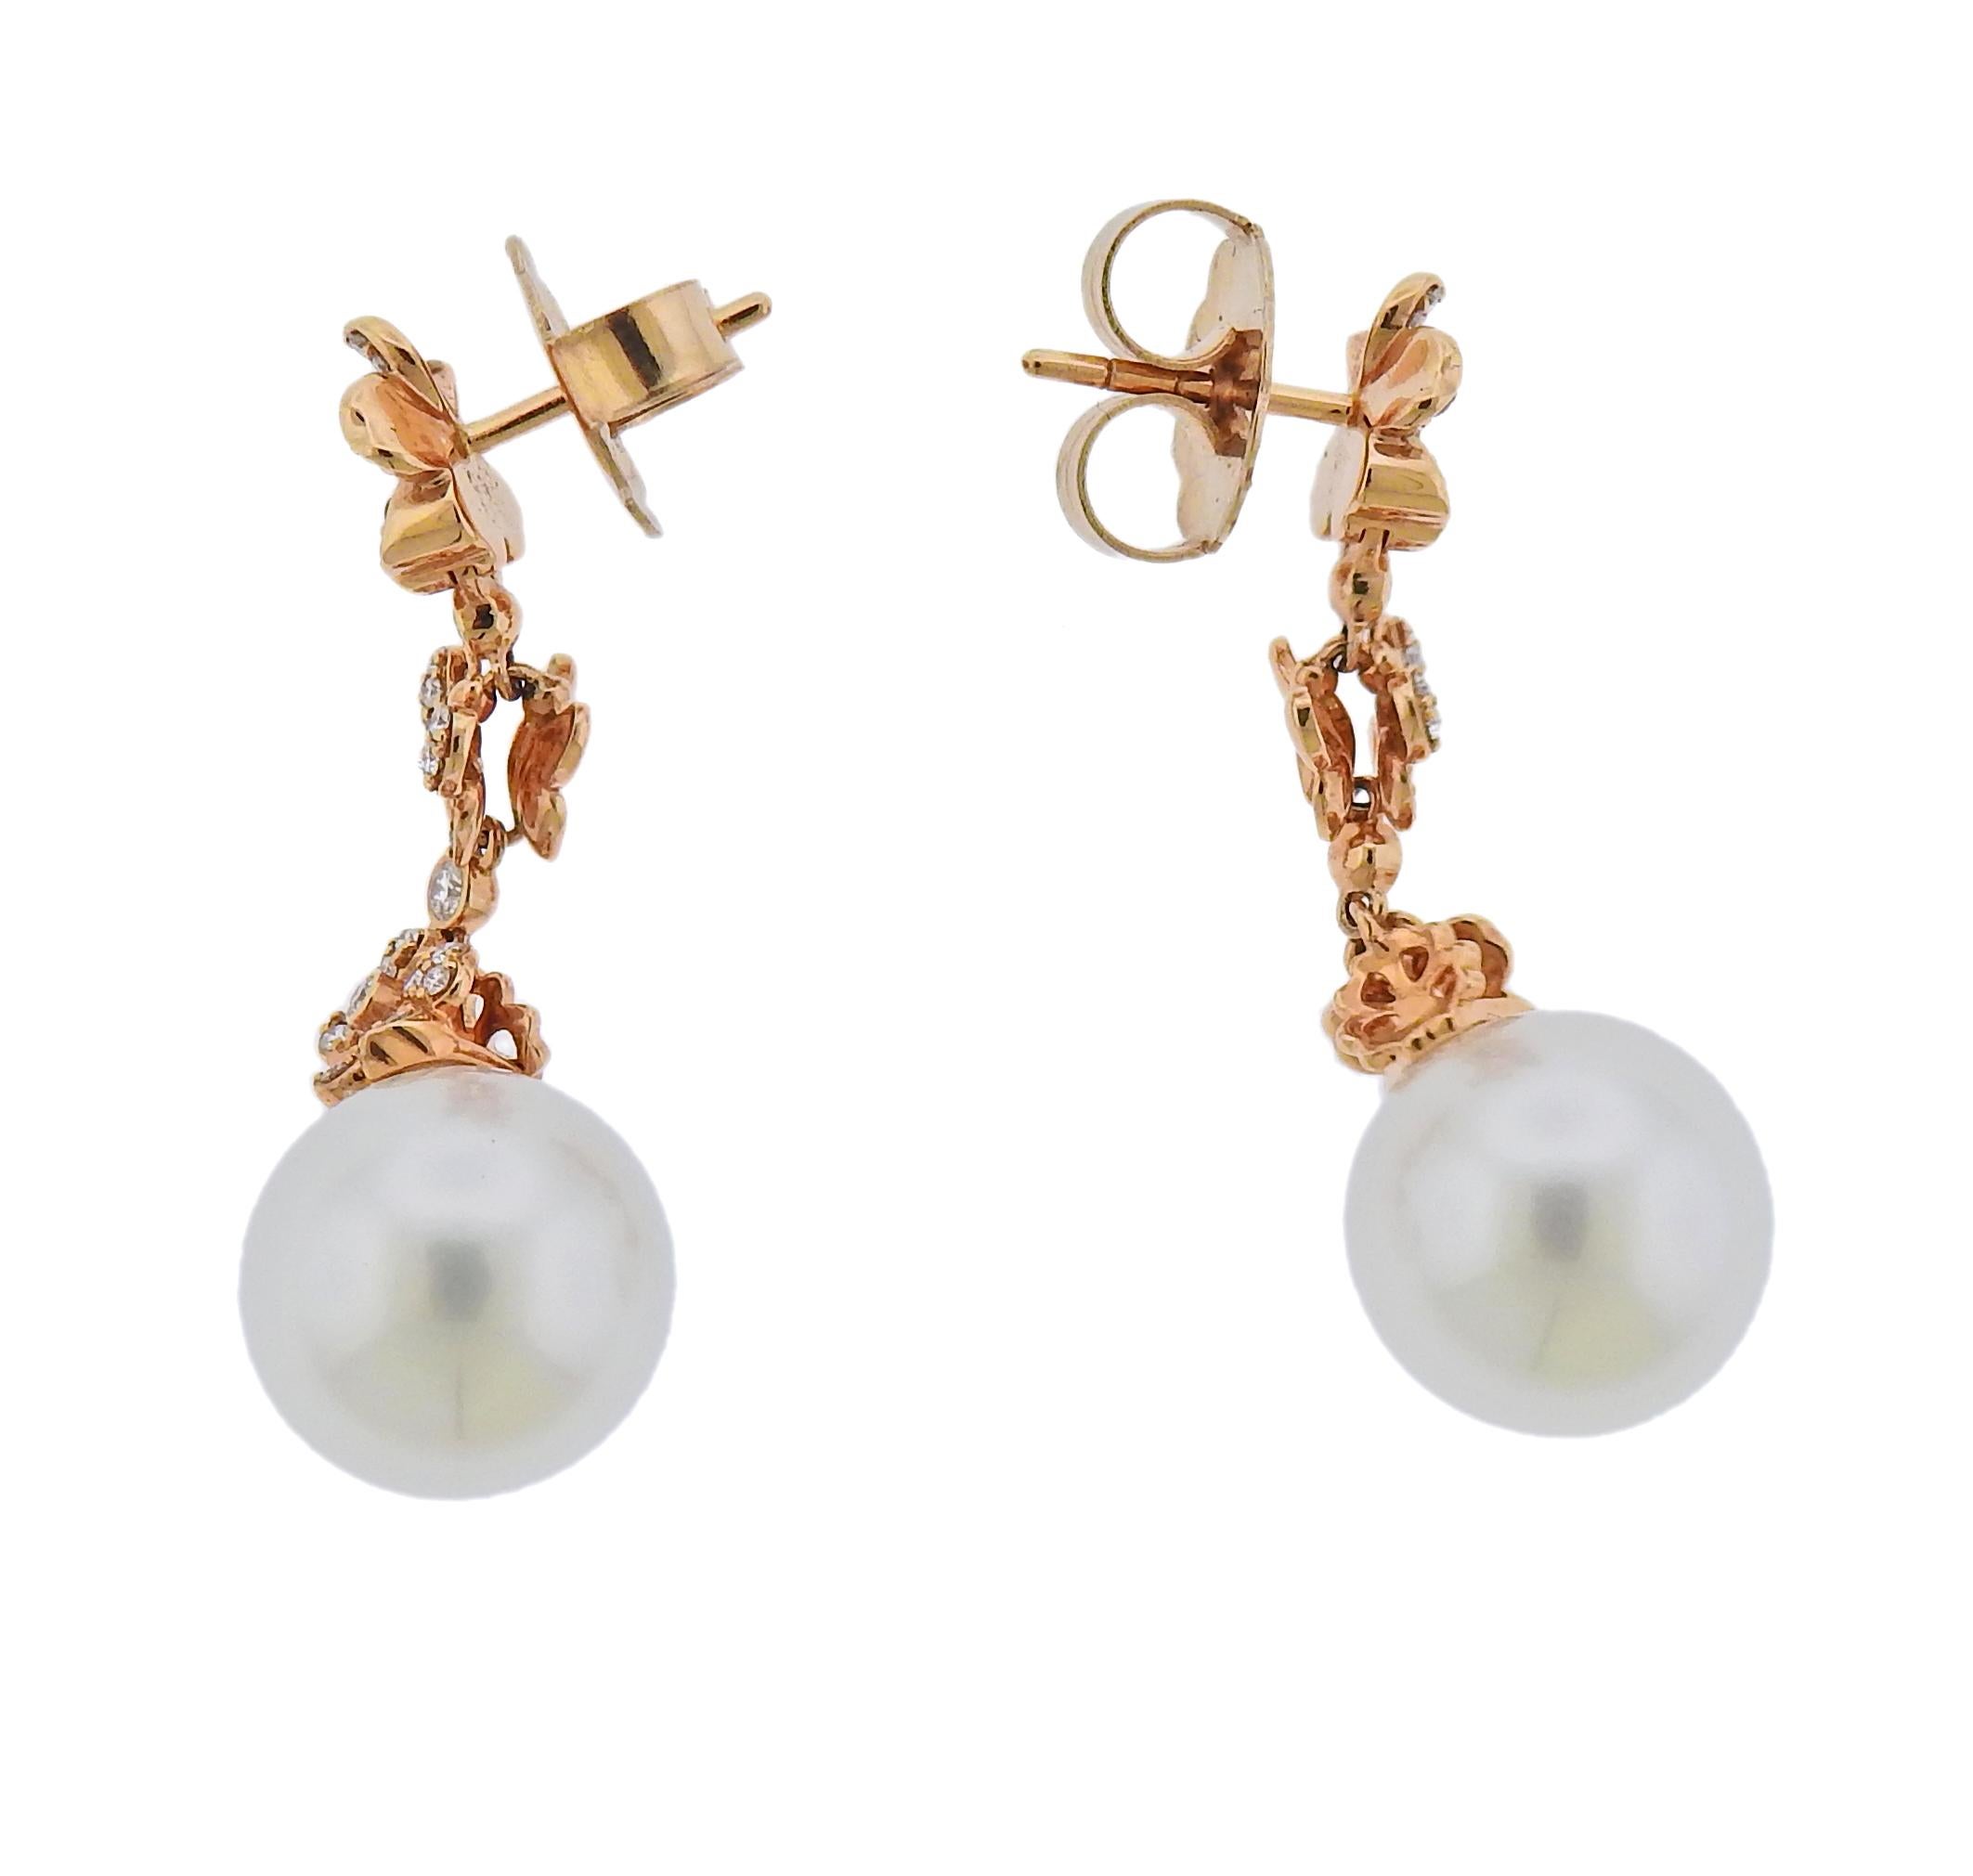 Pair of new 18k rose gold drop earrings by Mikimoto, set with A+ 11.8mm South Sea pearls and approx. 0.50ctw G/VS diamonds. Retail $11000. Come with box and warranty.  Earrings are 35mm long. Weight 10 grams. Marked: M mark 750.